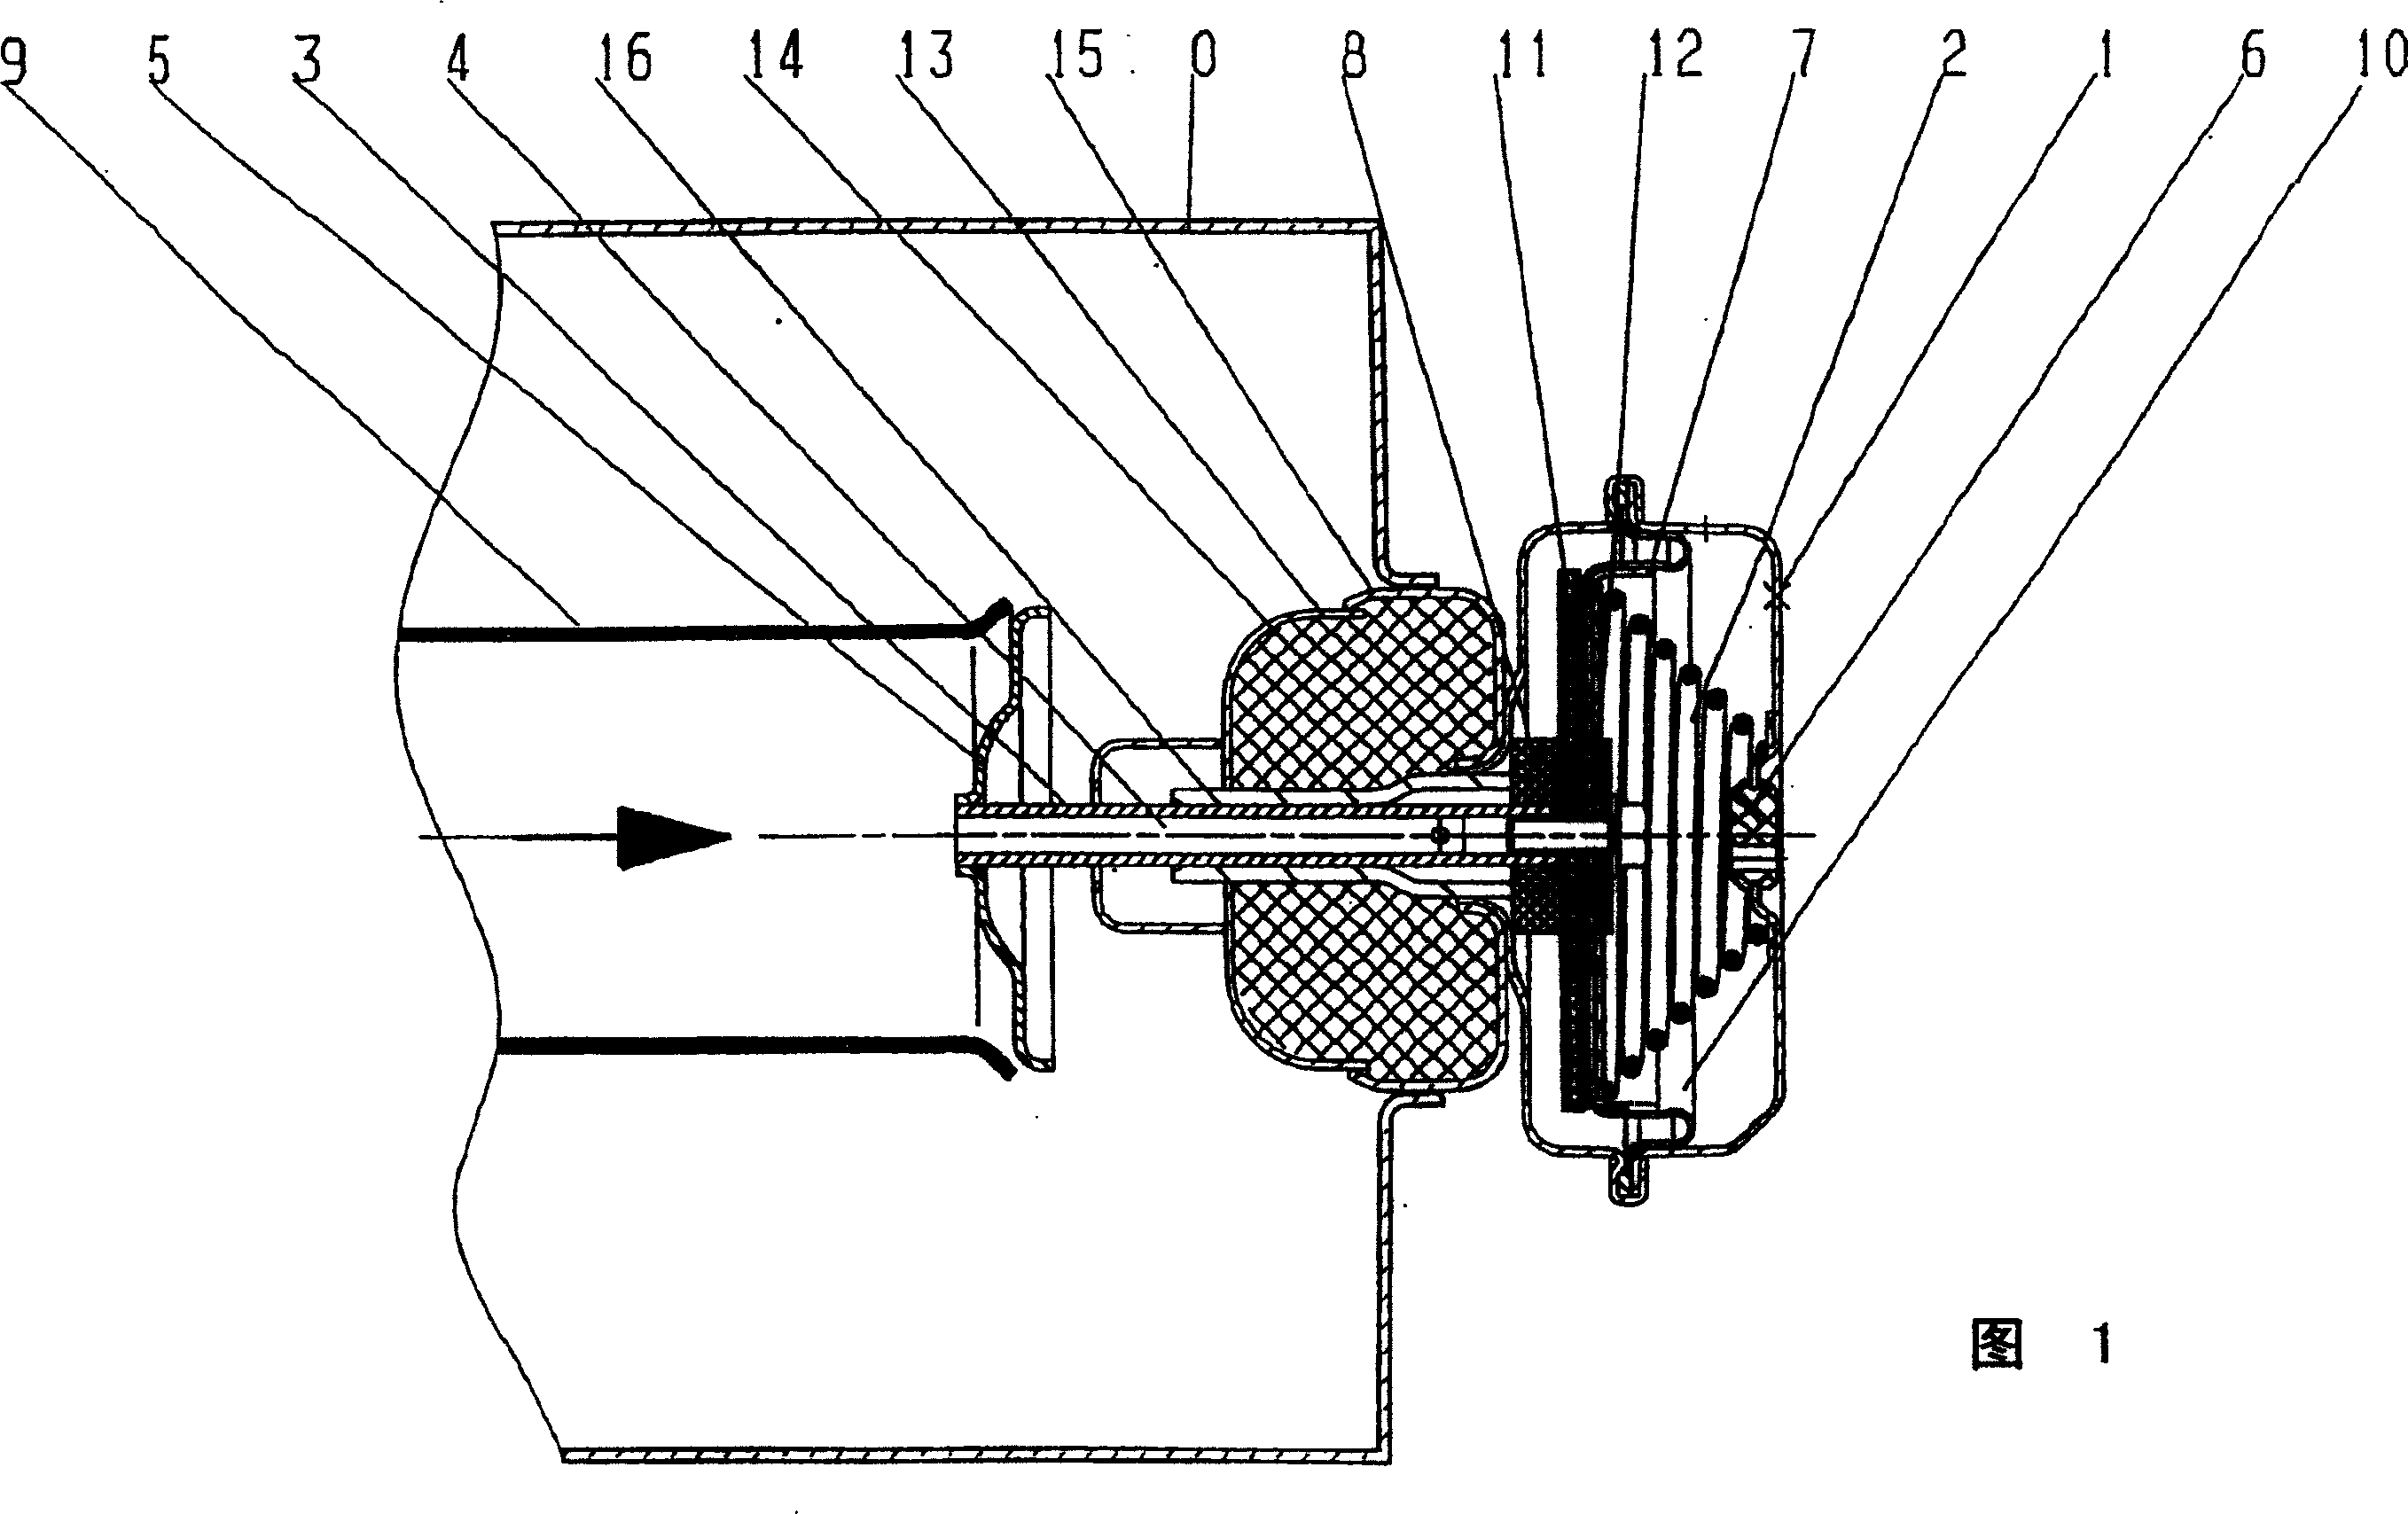 Muffler with variable acoustic properties